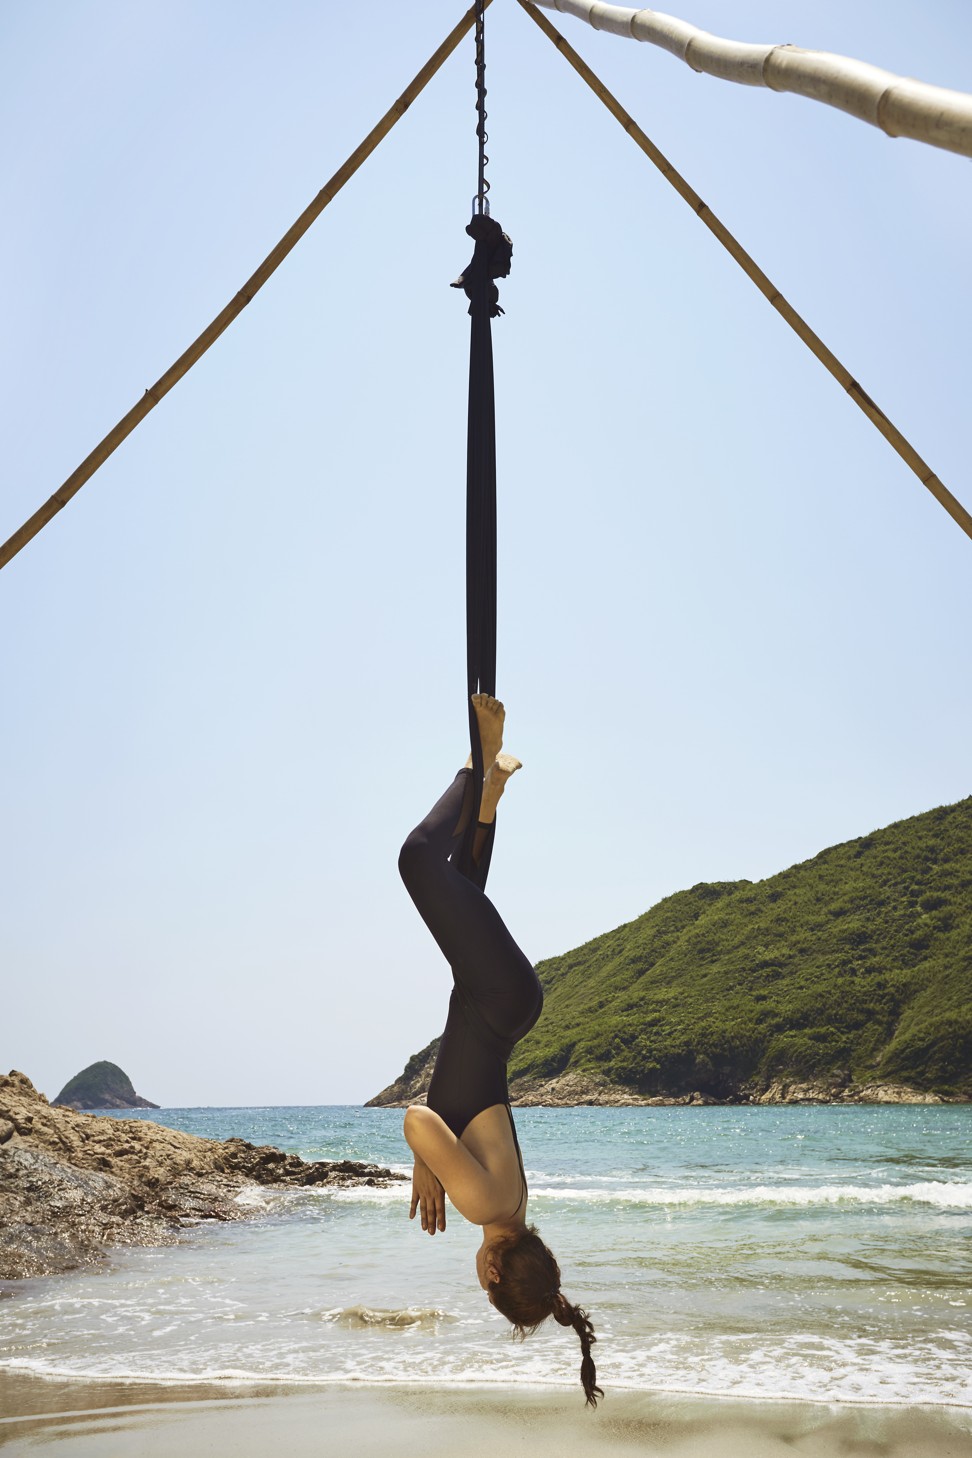 Milewicz demonstrates an inversion on her bamboo aerial yoga tripod. Photo: David Teng